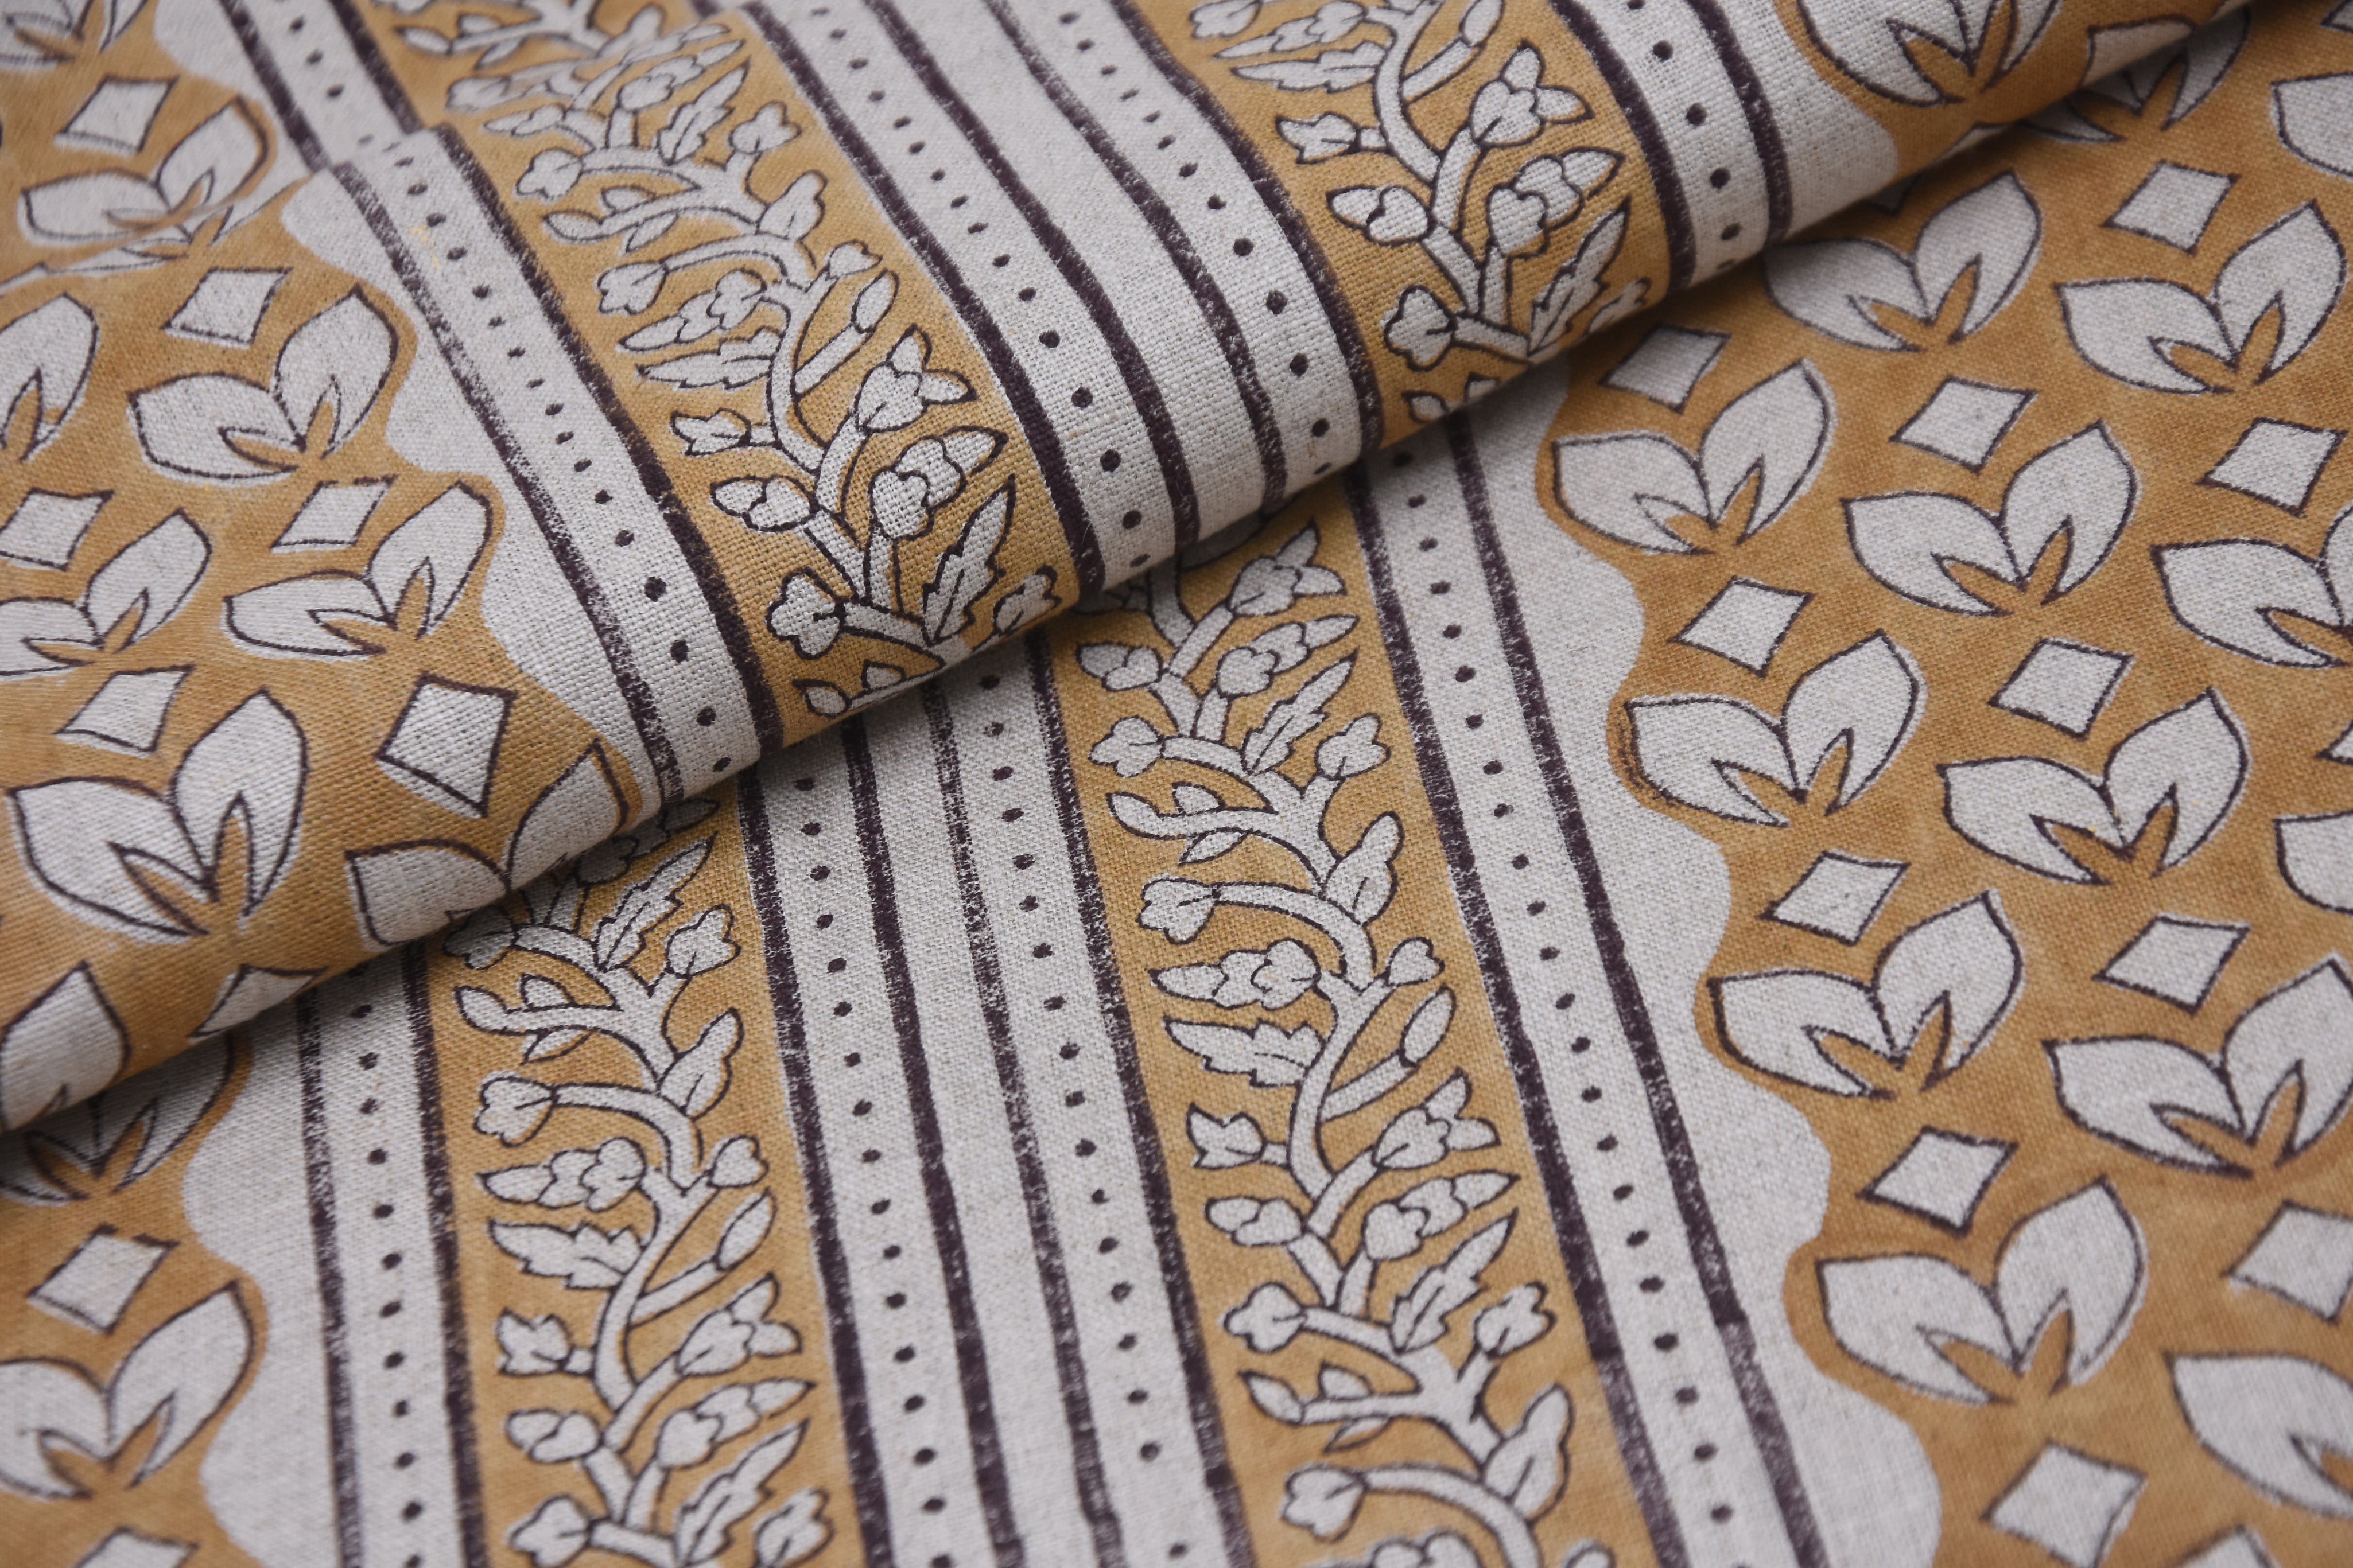 Block print fabric, linen fabric pillows and cushions, pure linen 58" wide, printed curtains, Indian block print fabric - TITLEE BORDER